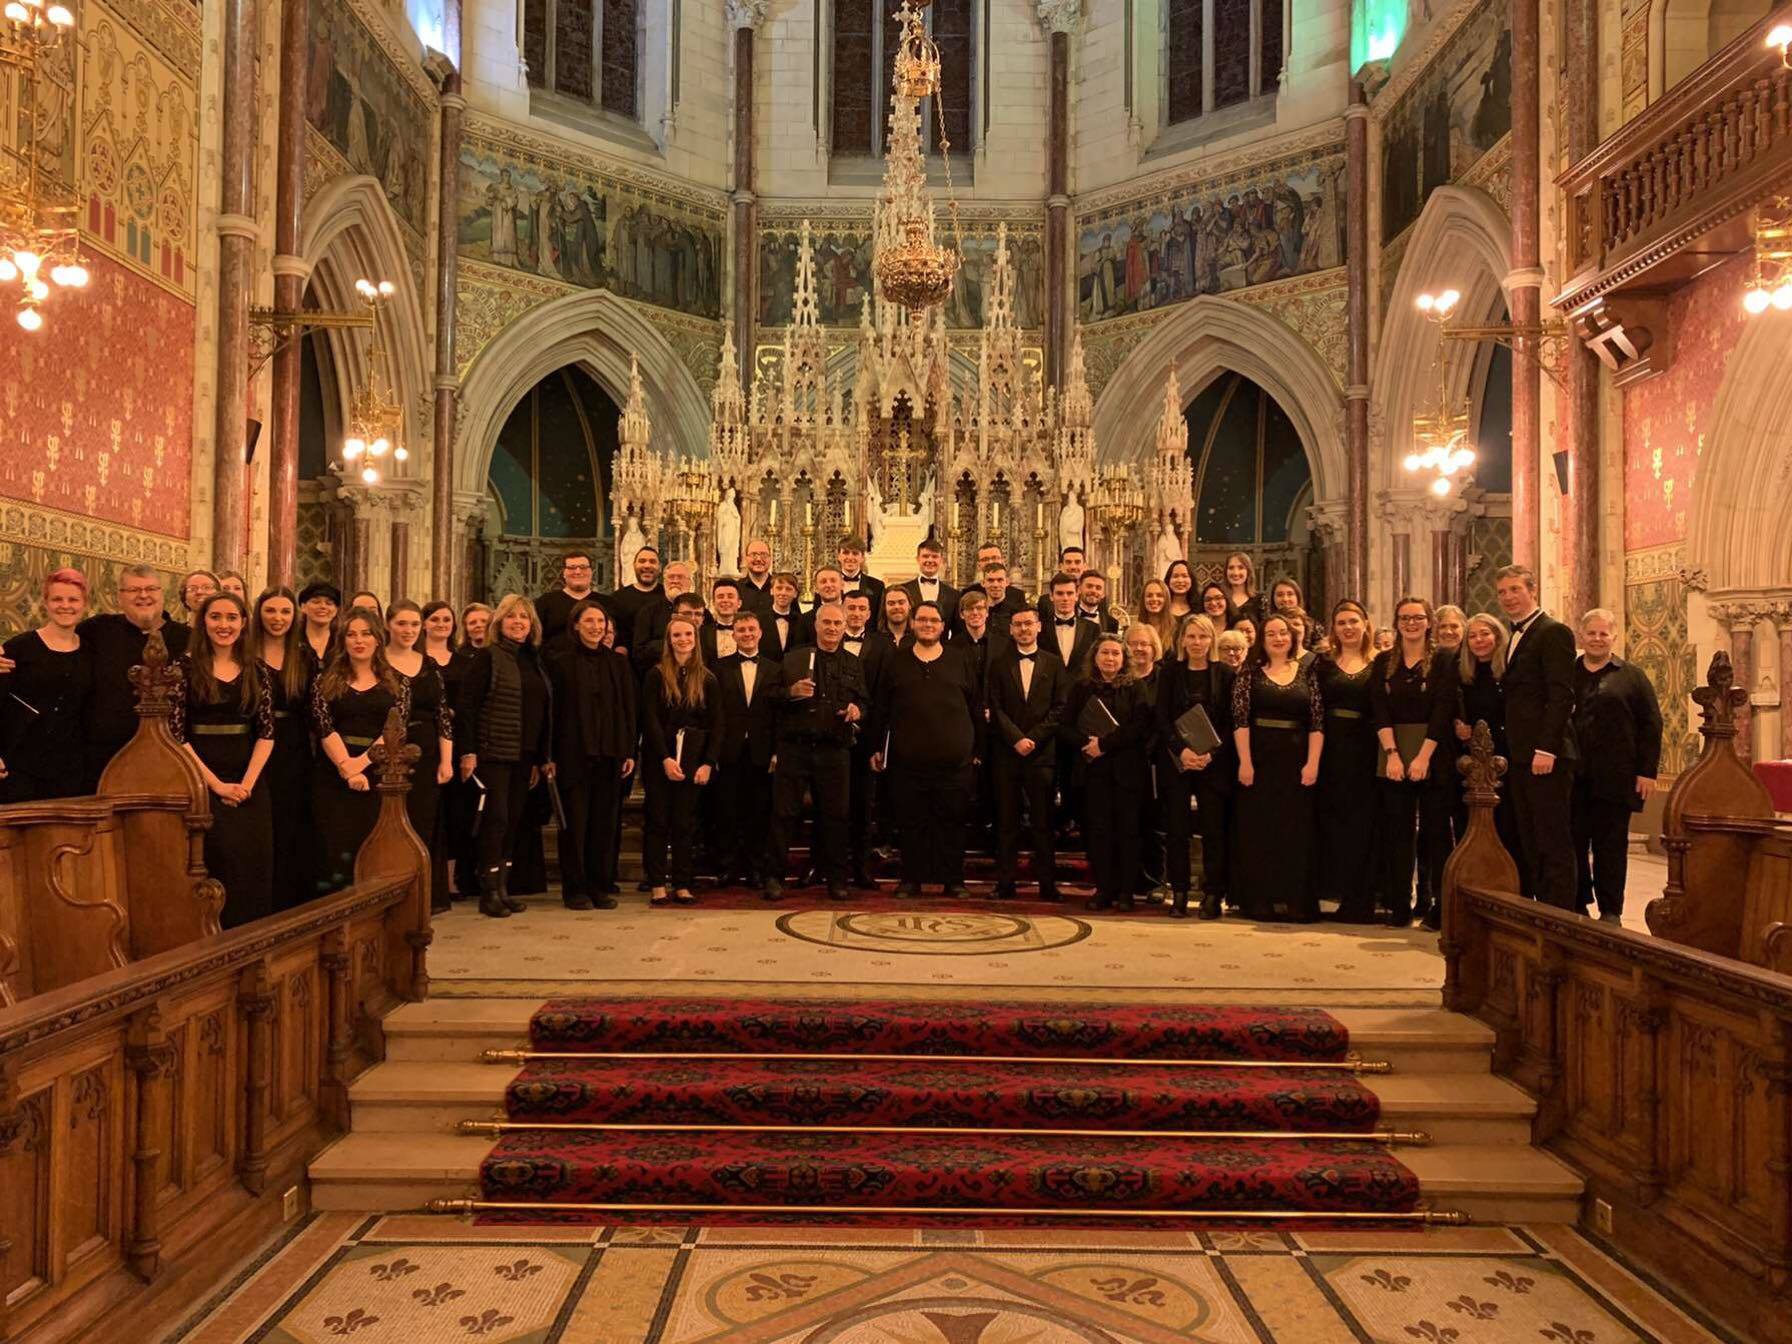 The-combined-choirs-of-Maynooth-Universty-Chamber-Choir-and-the-Bellarmine-University-Oratorio-Society.jpg#asset:9313